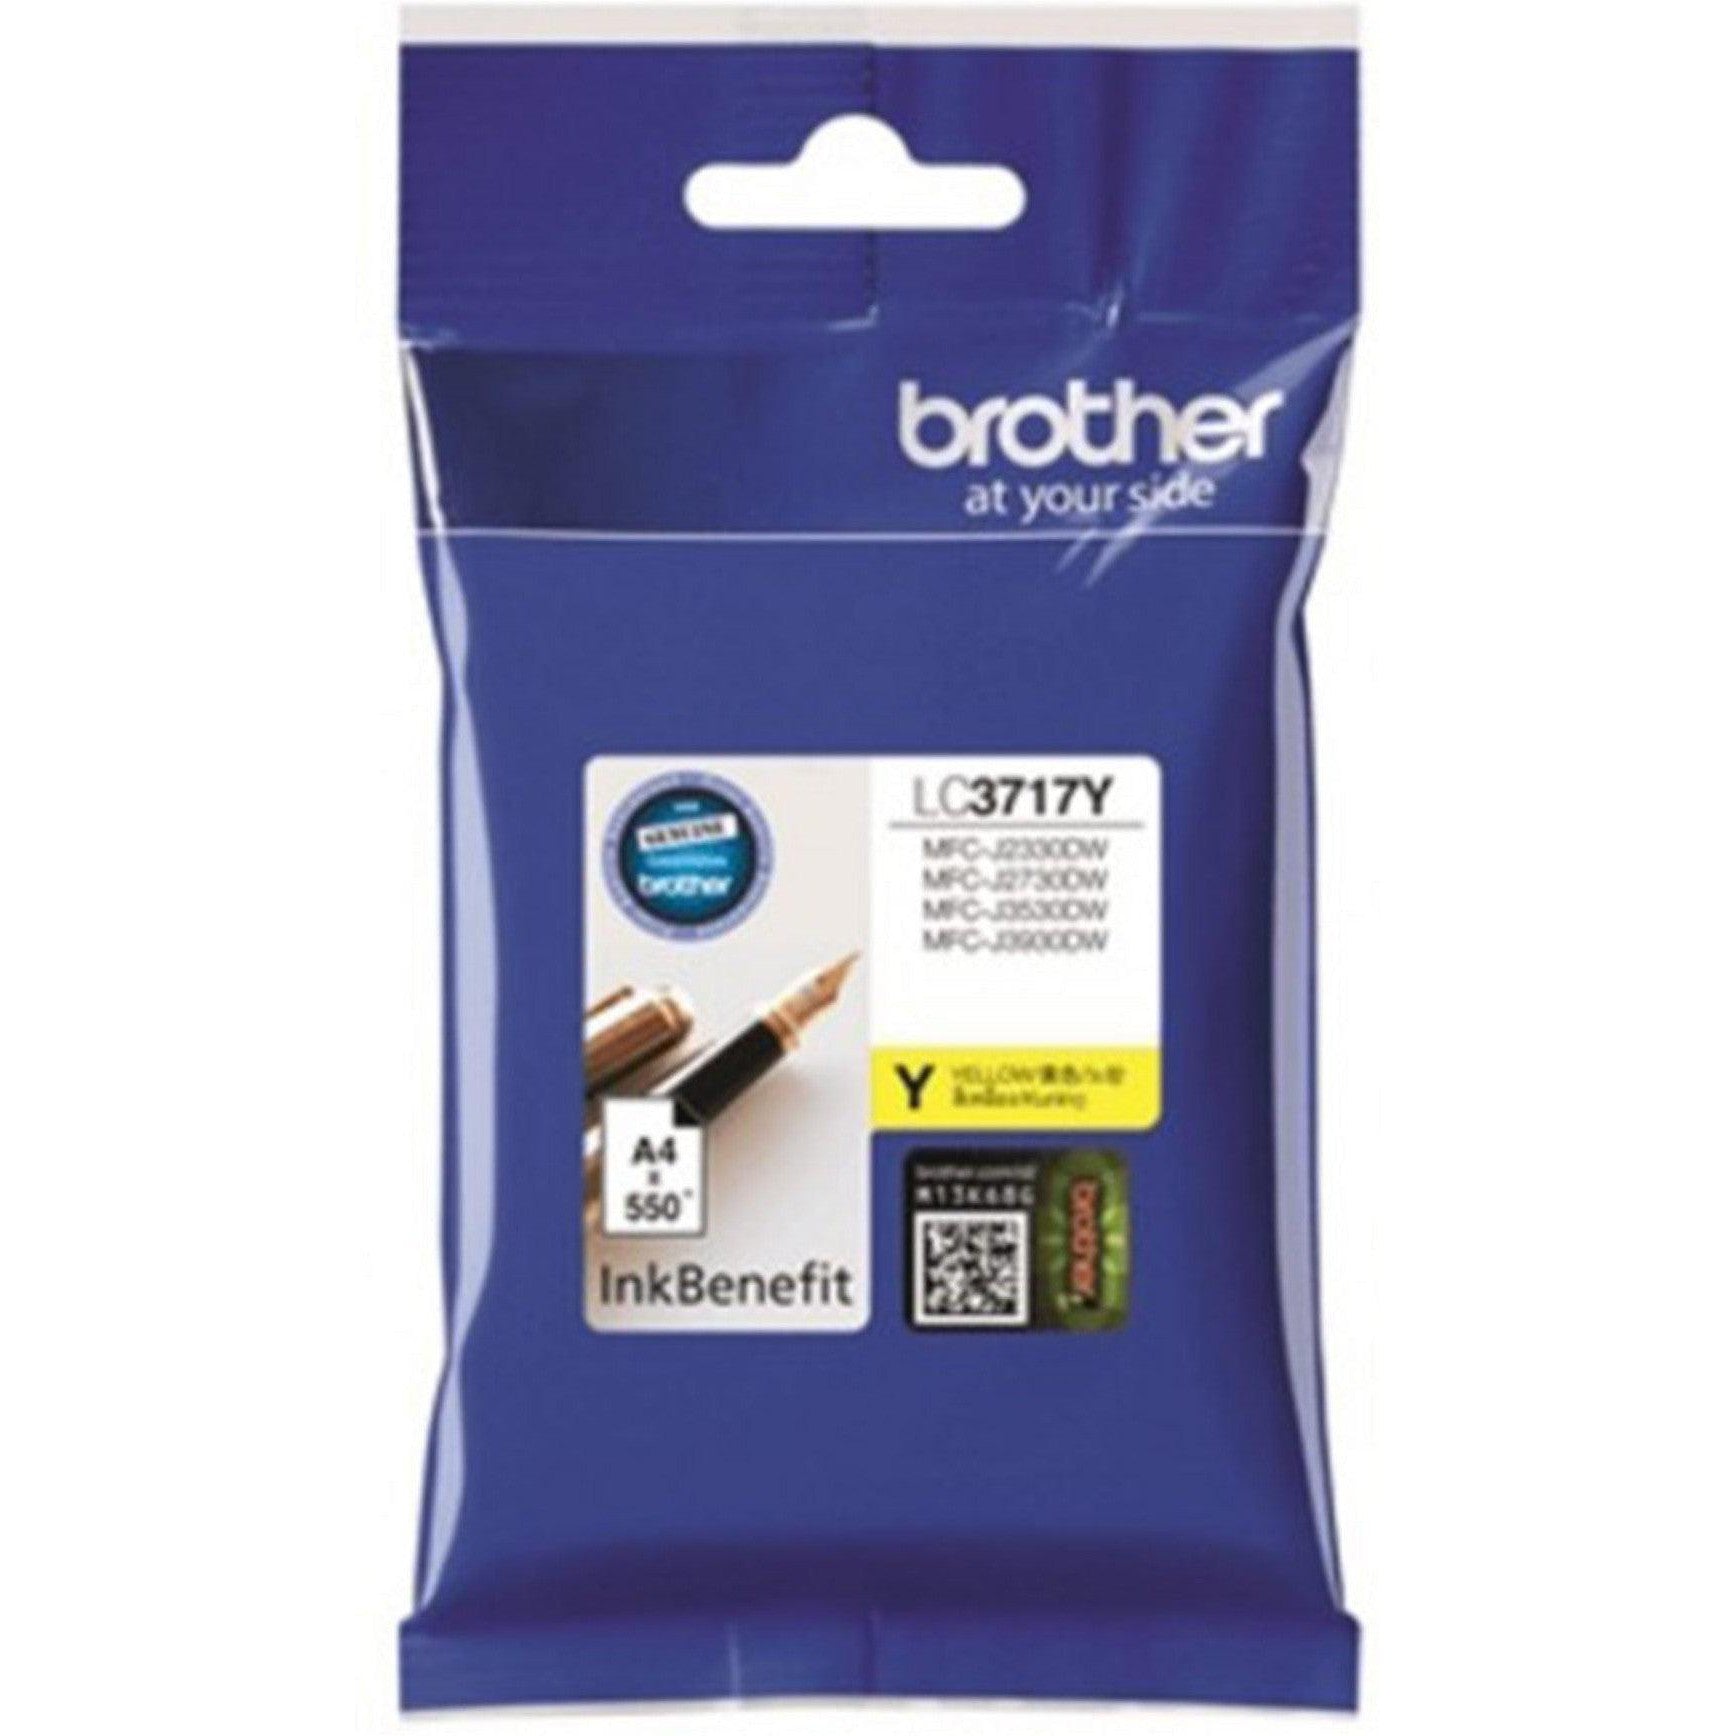 Brother Lc 3717 Yellow Ink Cartridge-Inks And Toners-Brother-Star Light Kuwait